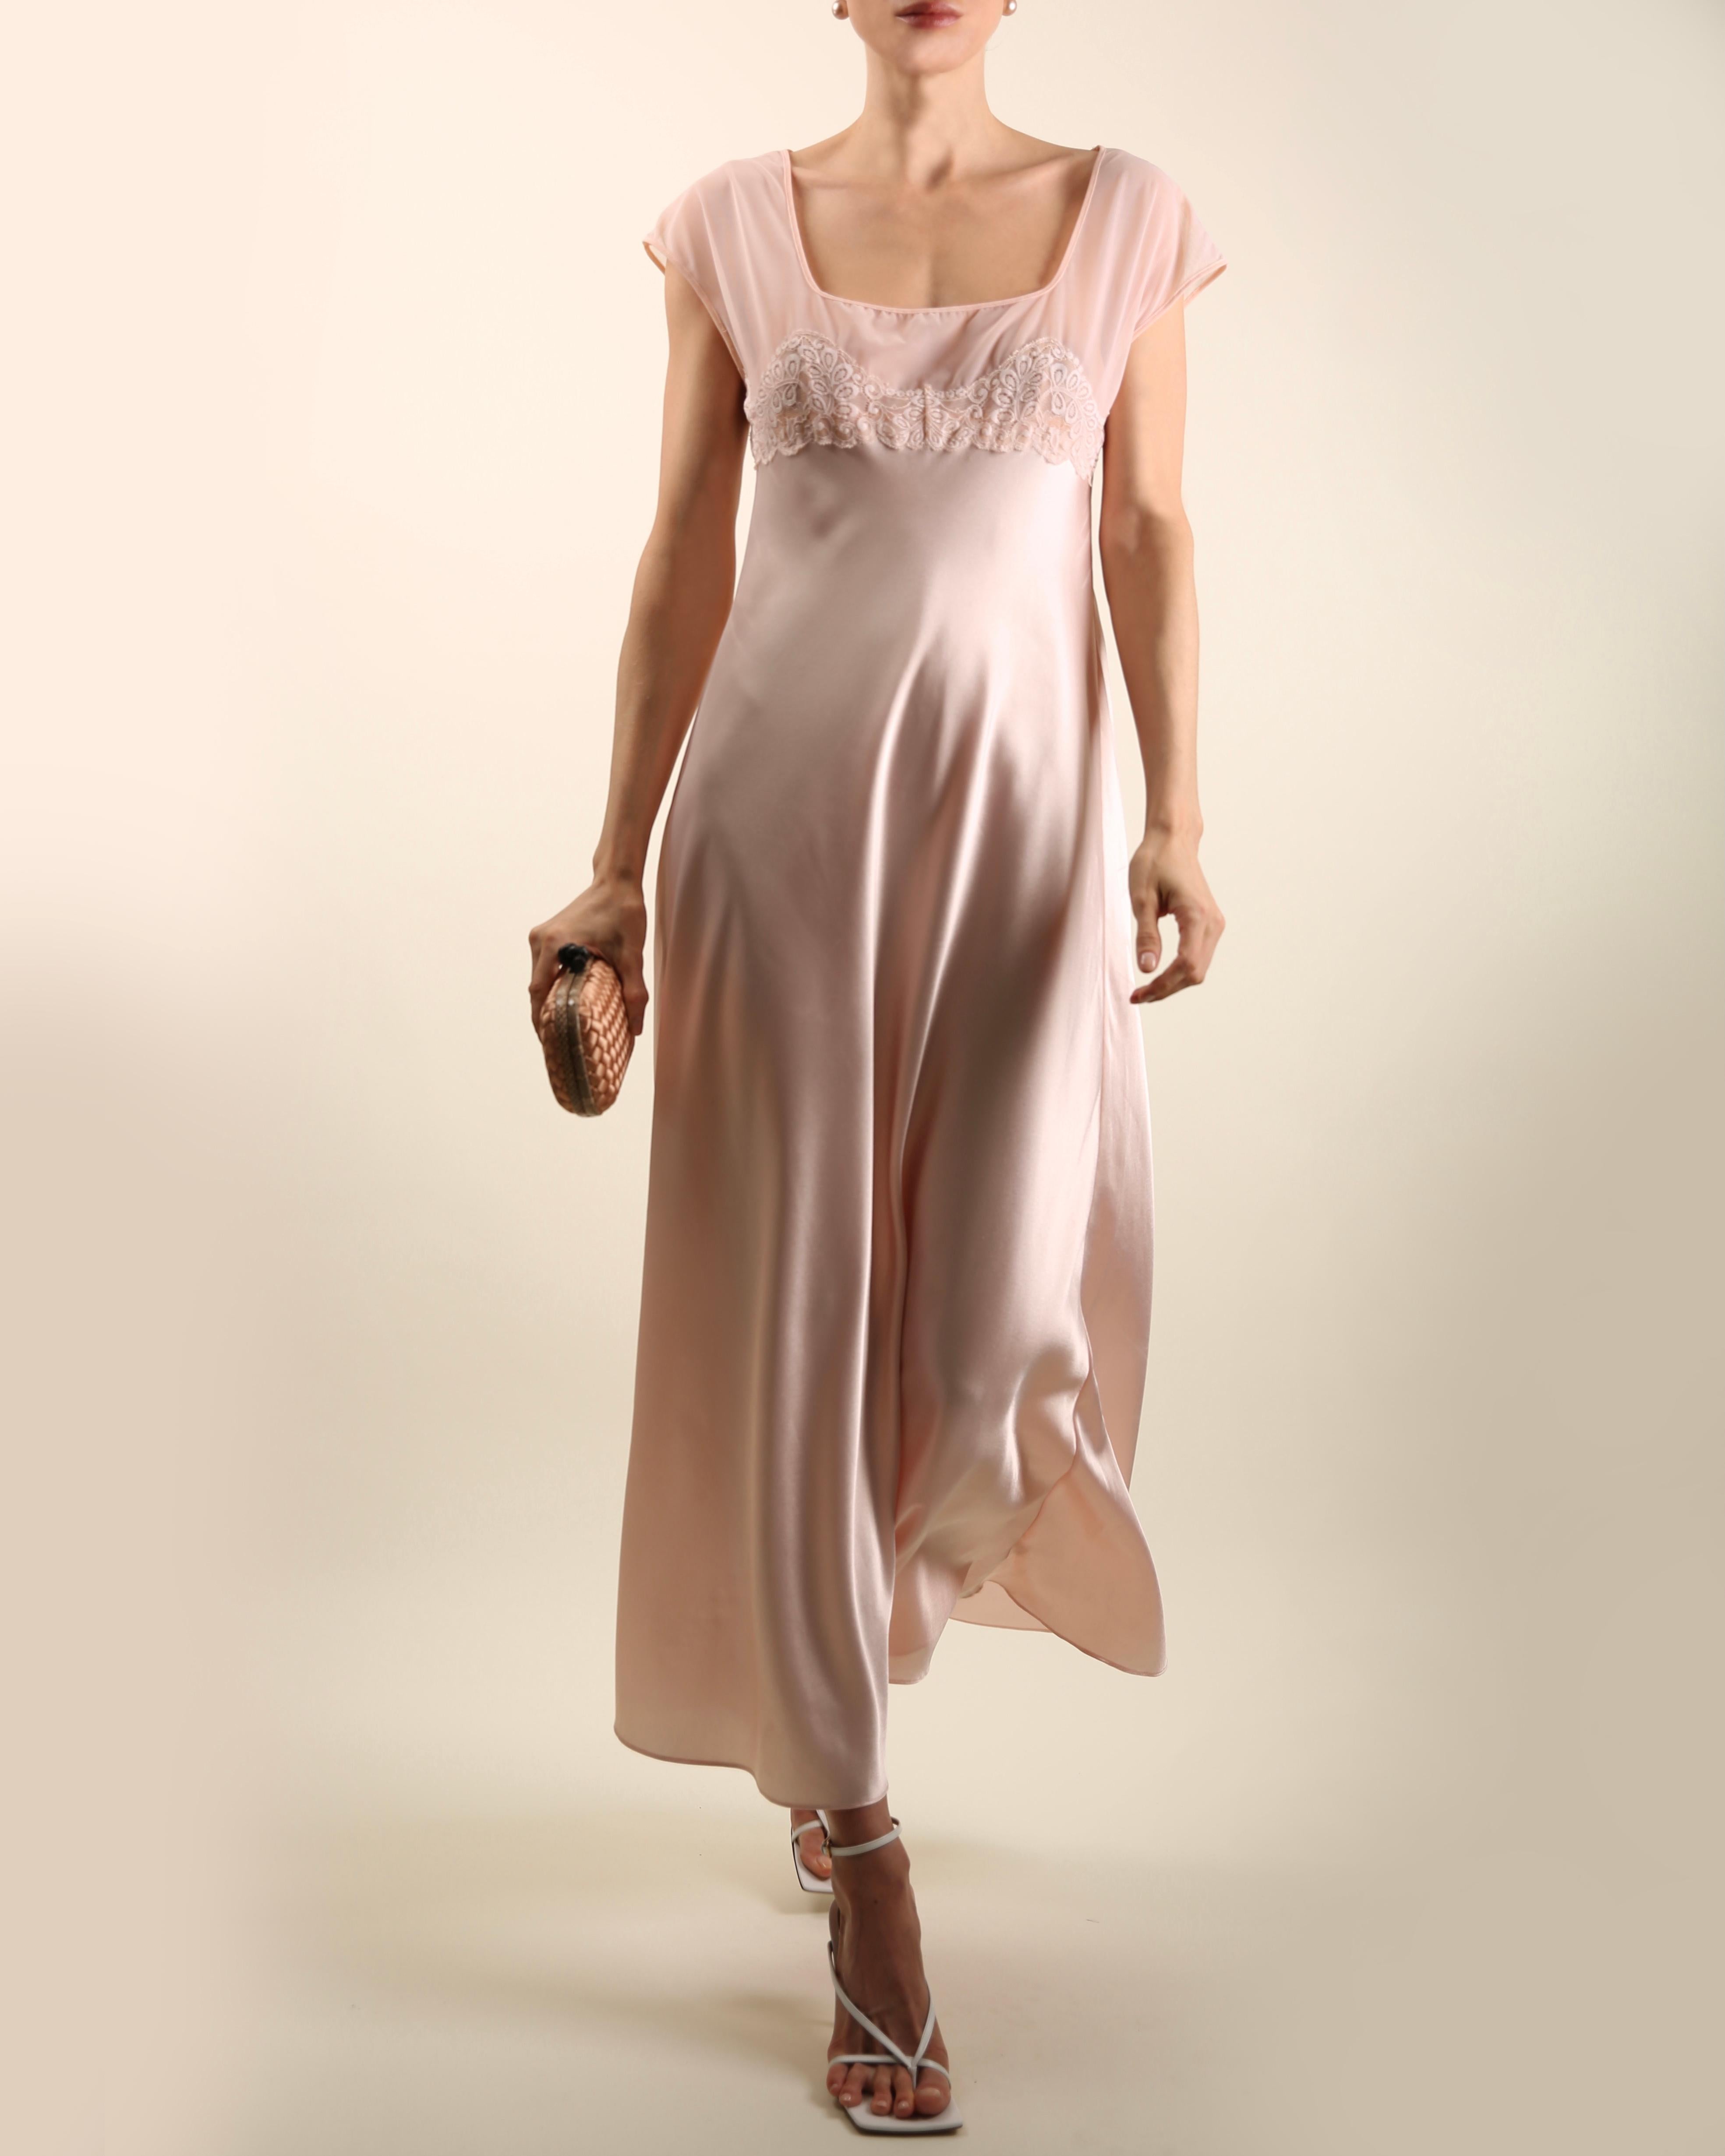 Vintage pink satin night gown by Valentino Intimo 
This can easily be worn in the day or evening as a slip dress teamed with a pair of flat sandals or high heels
Sleeveless midi length with a mesh upper, lace bust and satin body

FREE SHIPPING